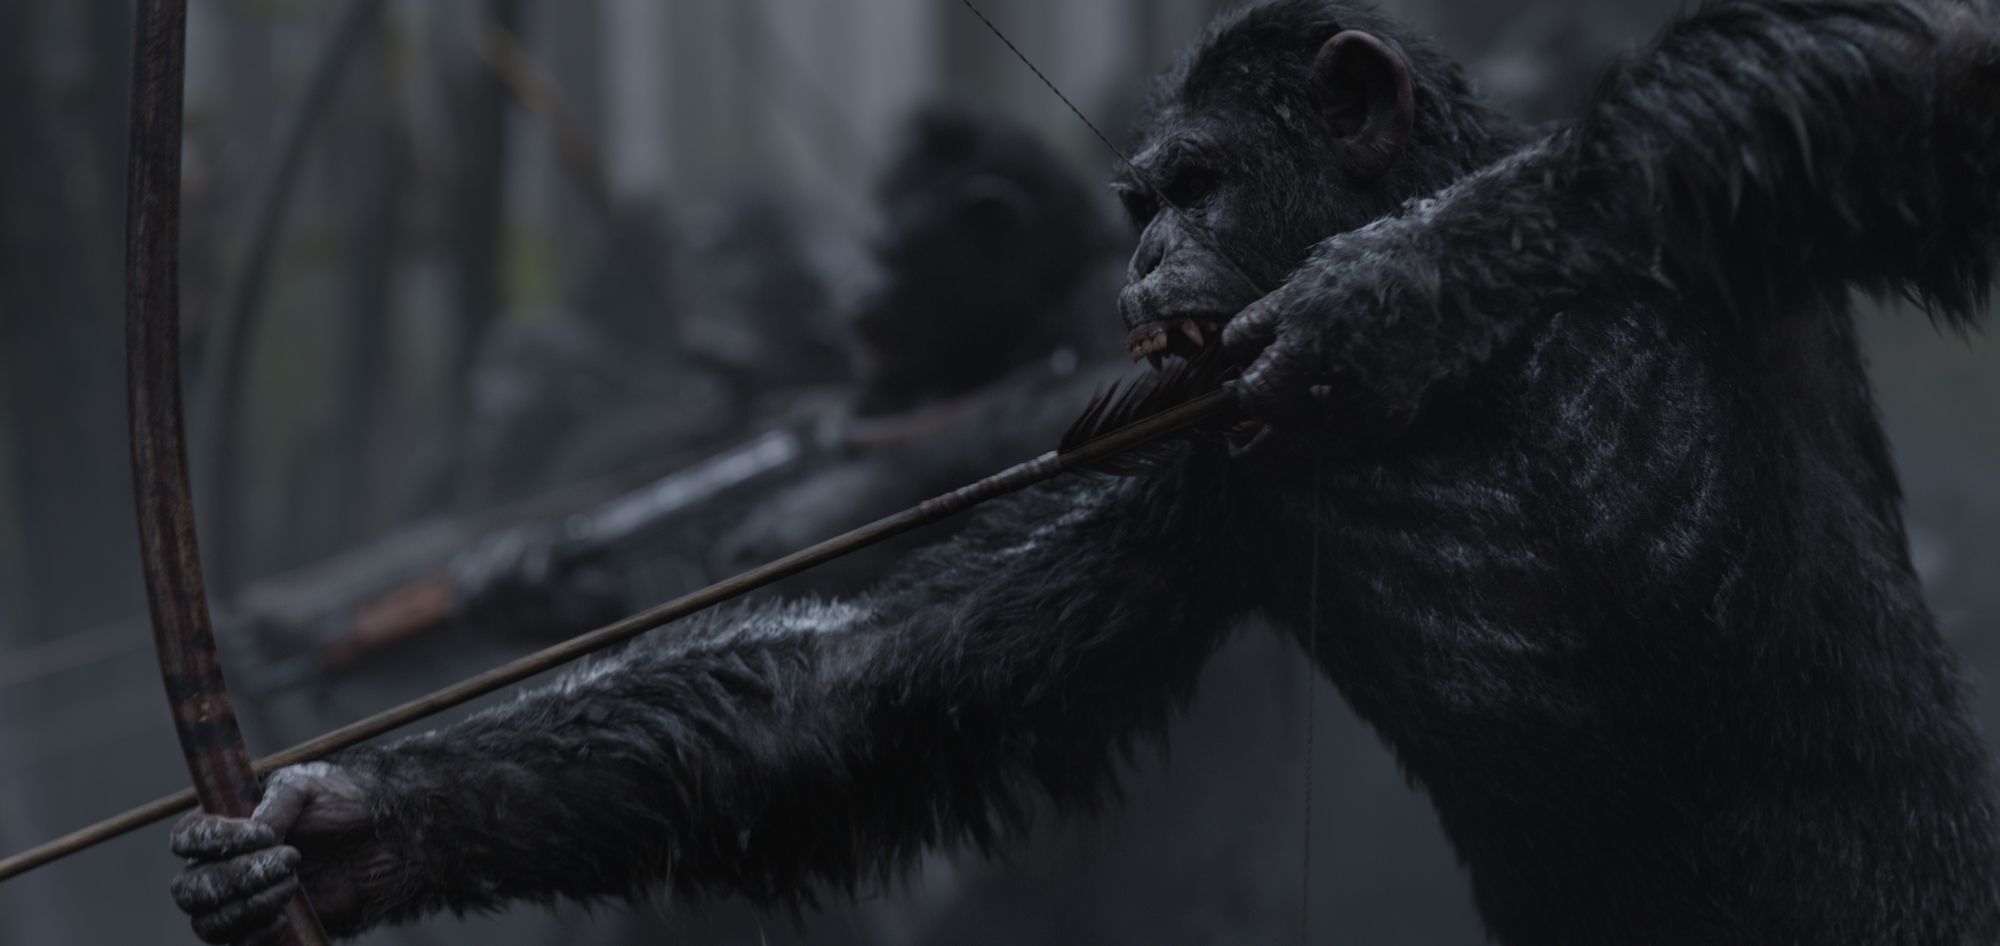 War for the Planet of the Apes - Firing arrows